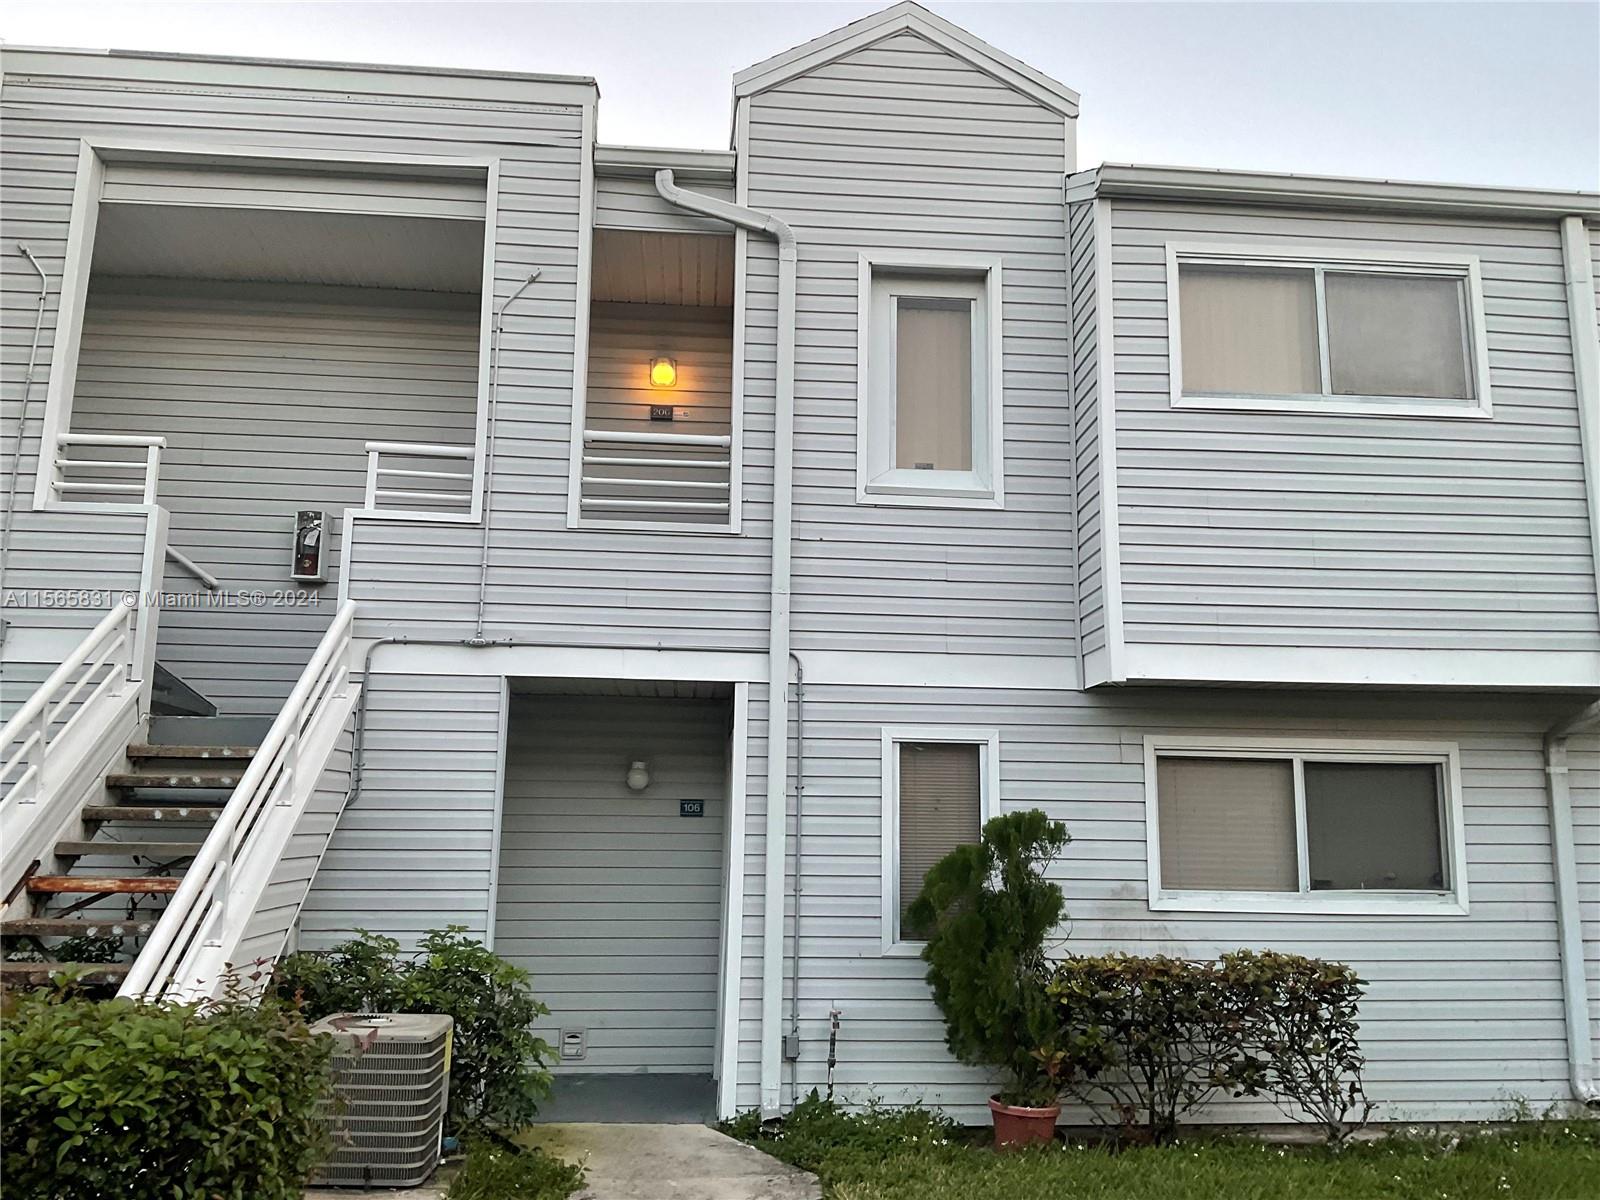 3473 NW 44th St 206, Oakland Park, Florida 33309, 1 Bedroom Bedrooms, ,1 BathroomBathrooms,Residentiallease,For Rent,3473 NW 44th St 206,A11565831